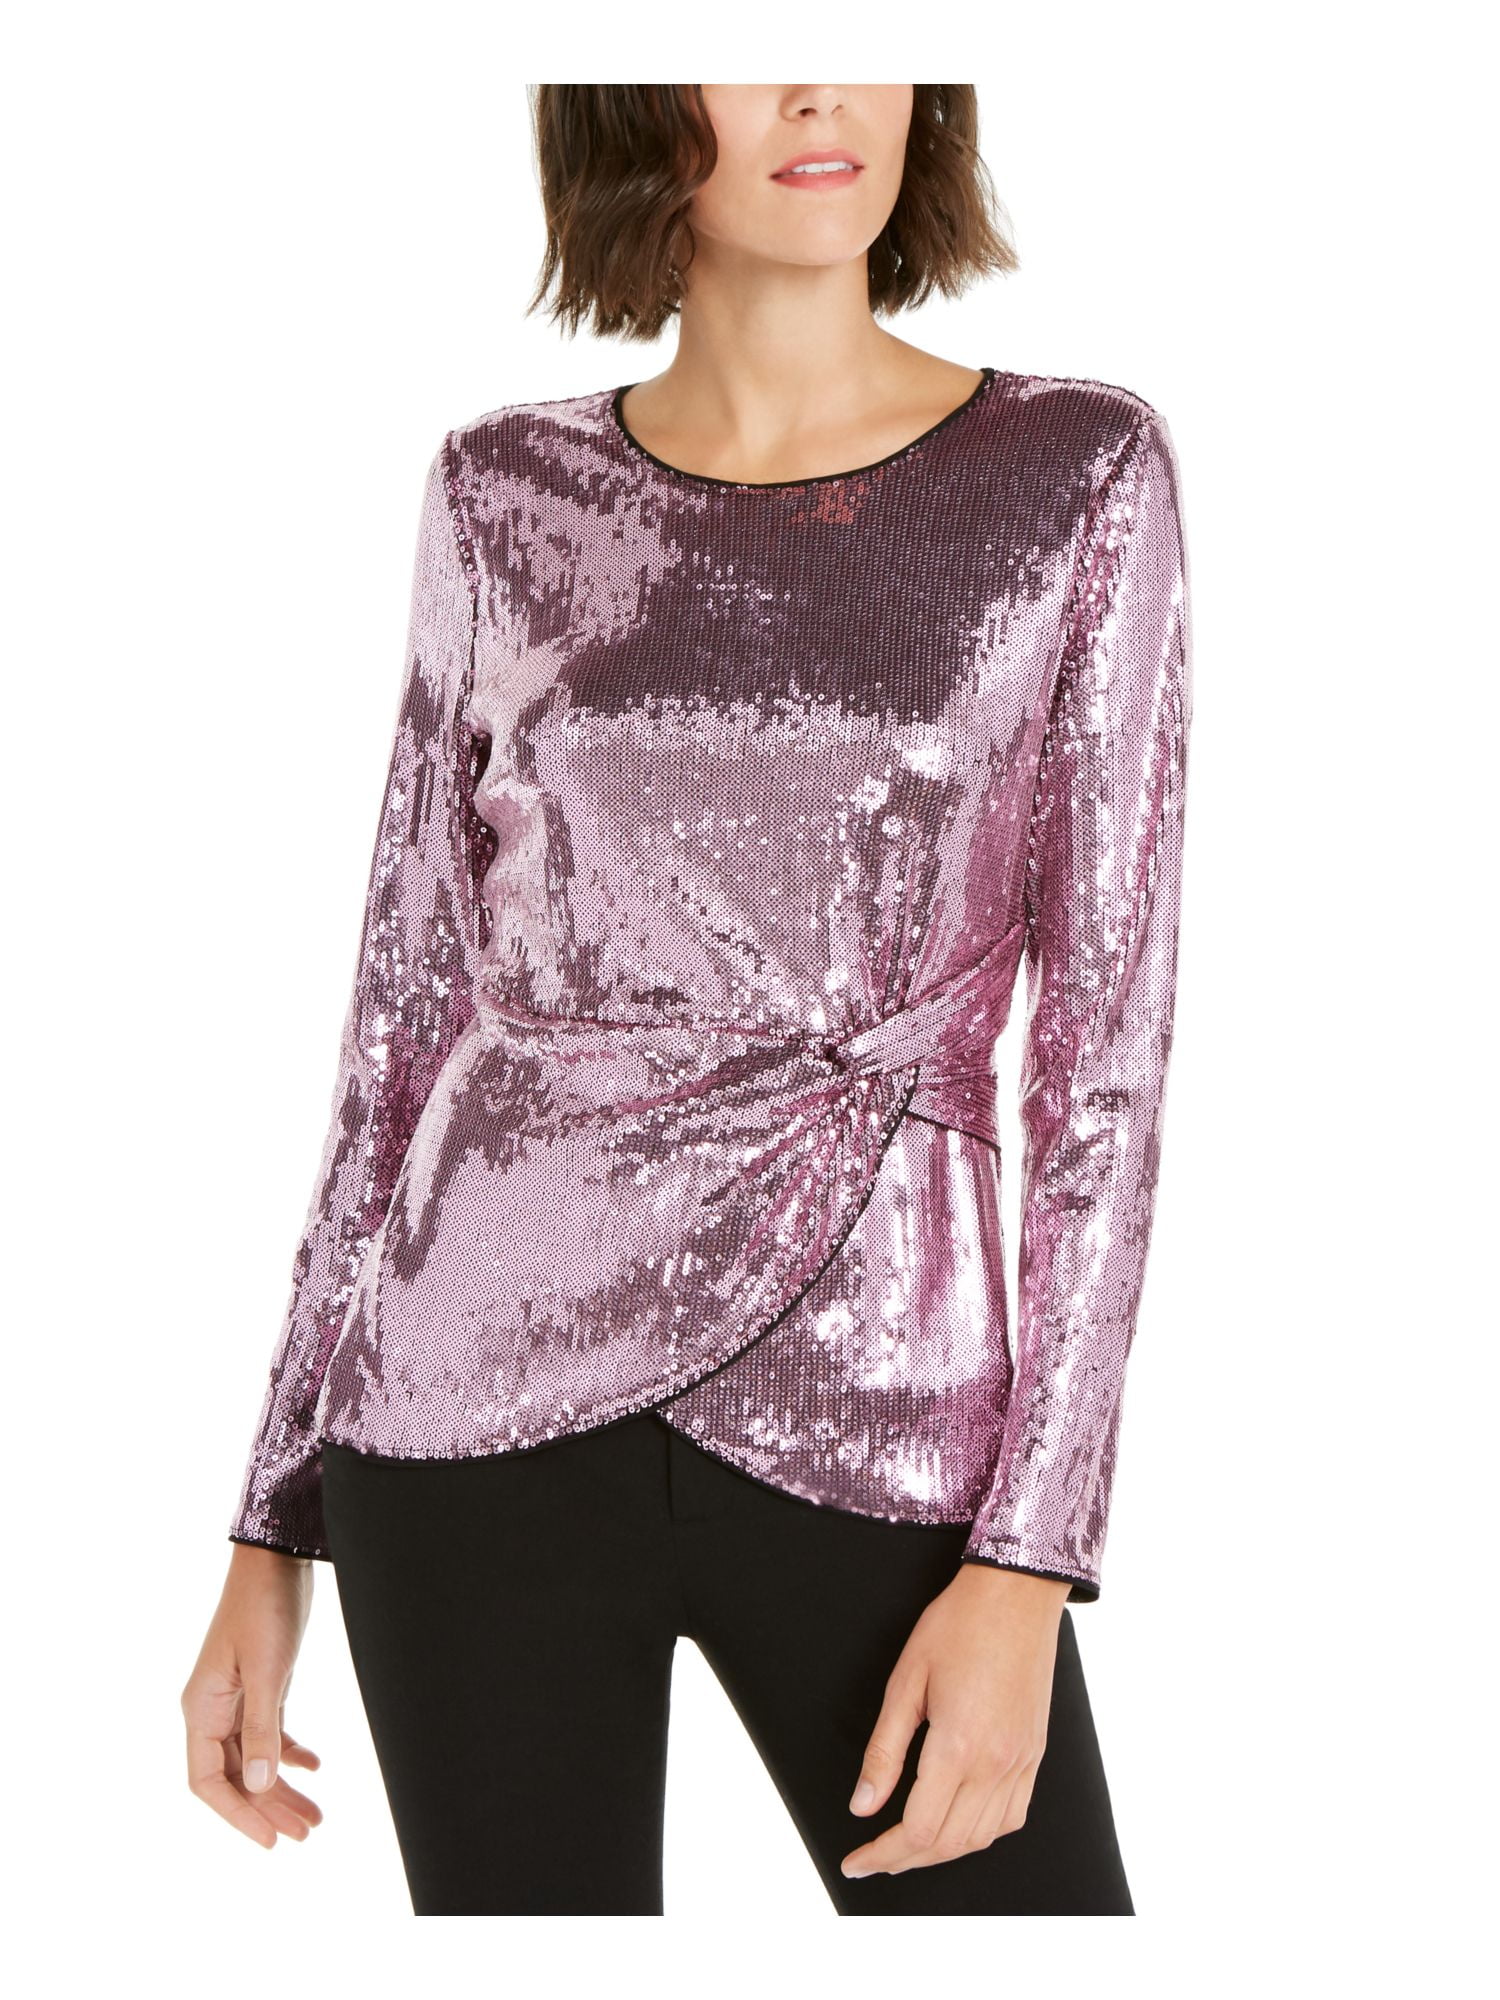 Inc Women's Twisted Sequined Top, Pink, Large